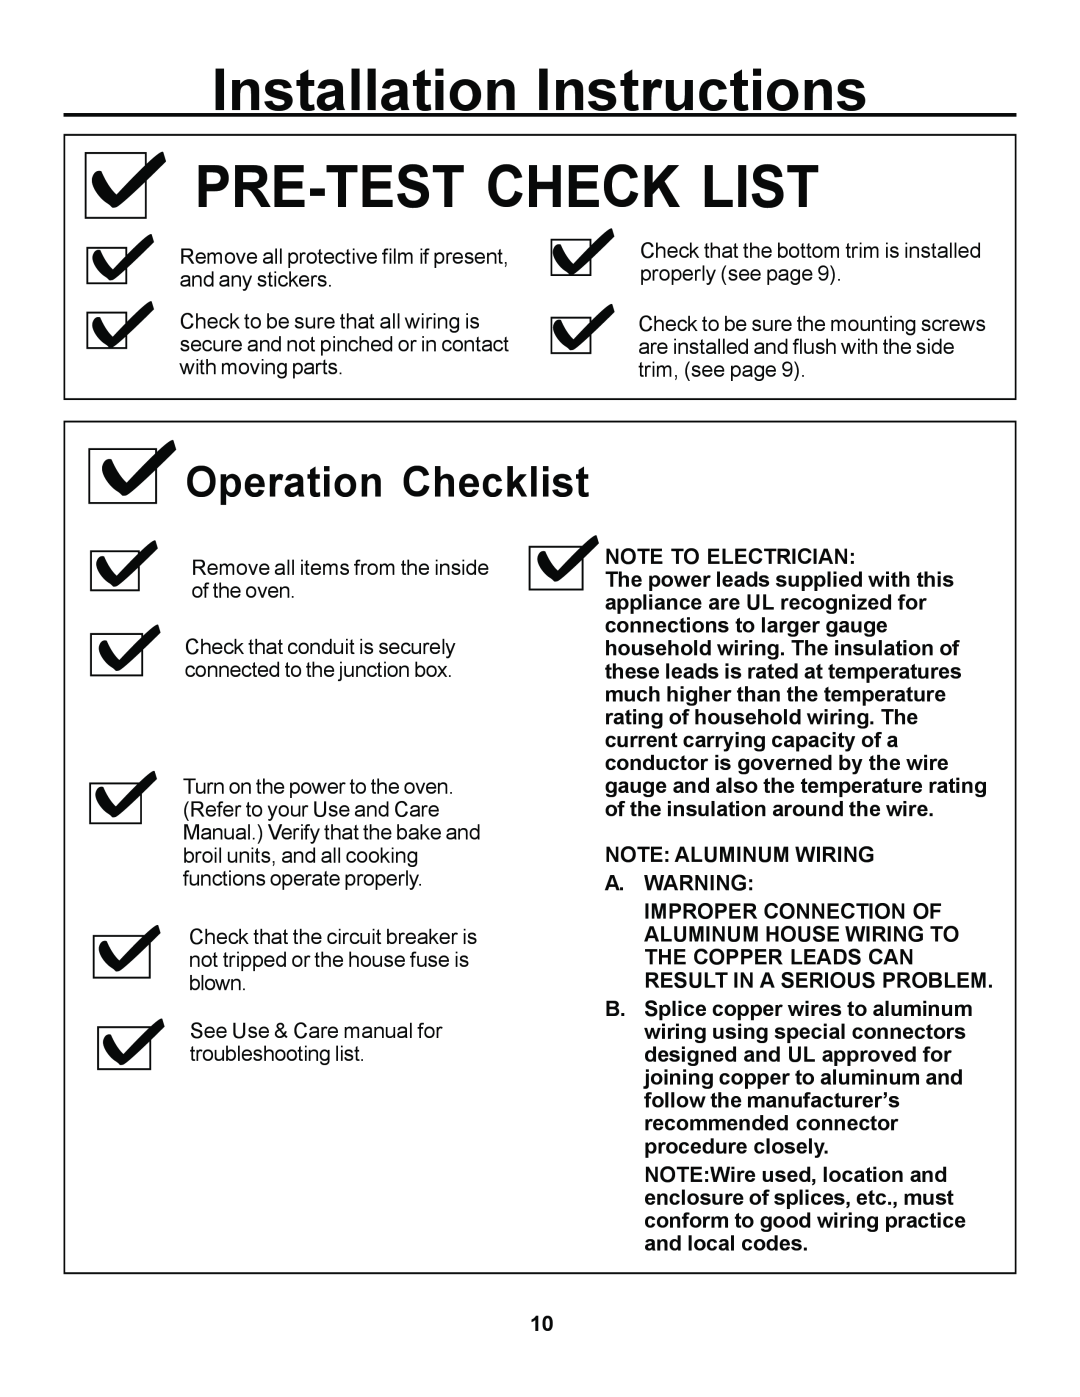 Cowon Systems JKP85 installation instructions Installation Instructions PRE-TEST CHECK LIST, Operation Checklist 